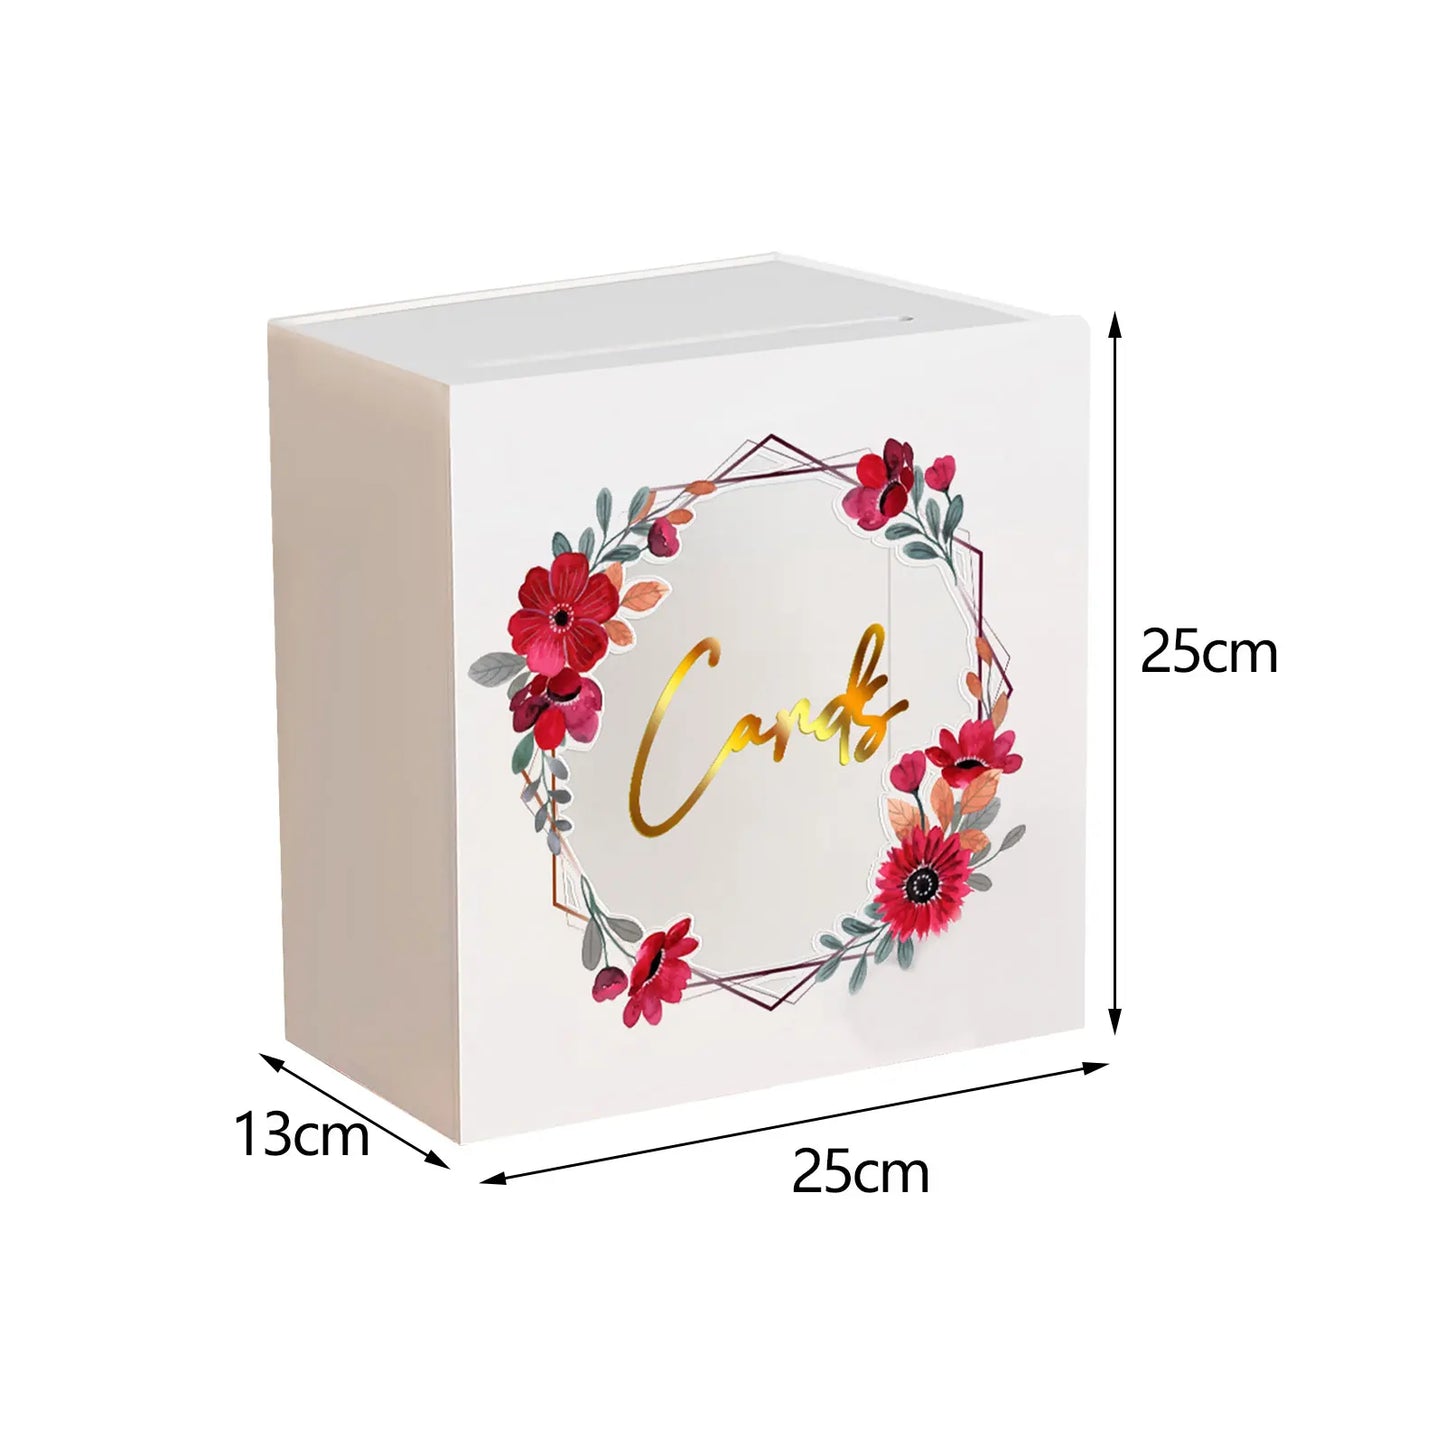 size of the acrylic card box